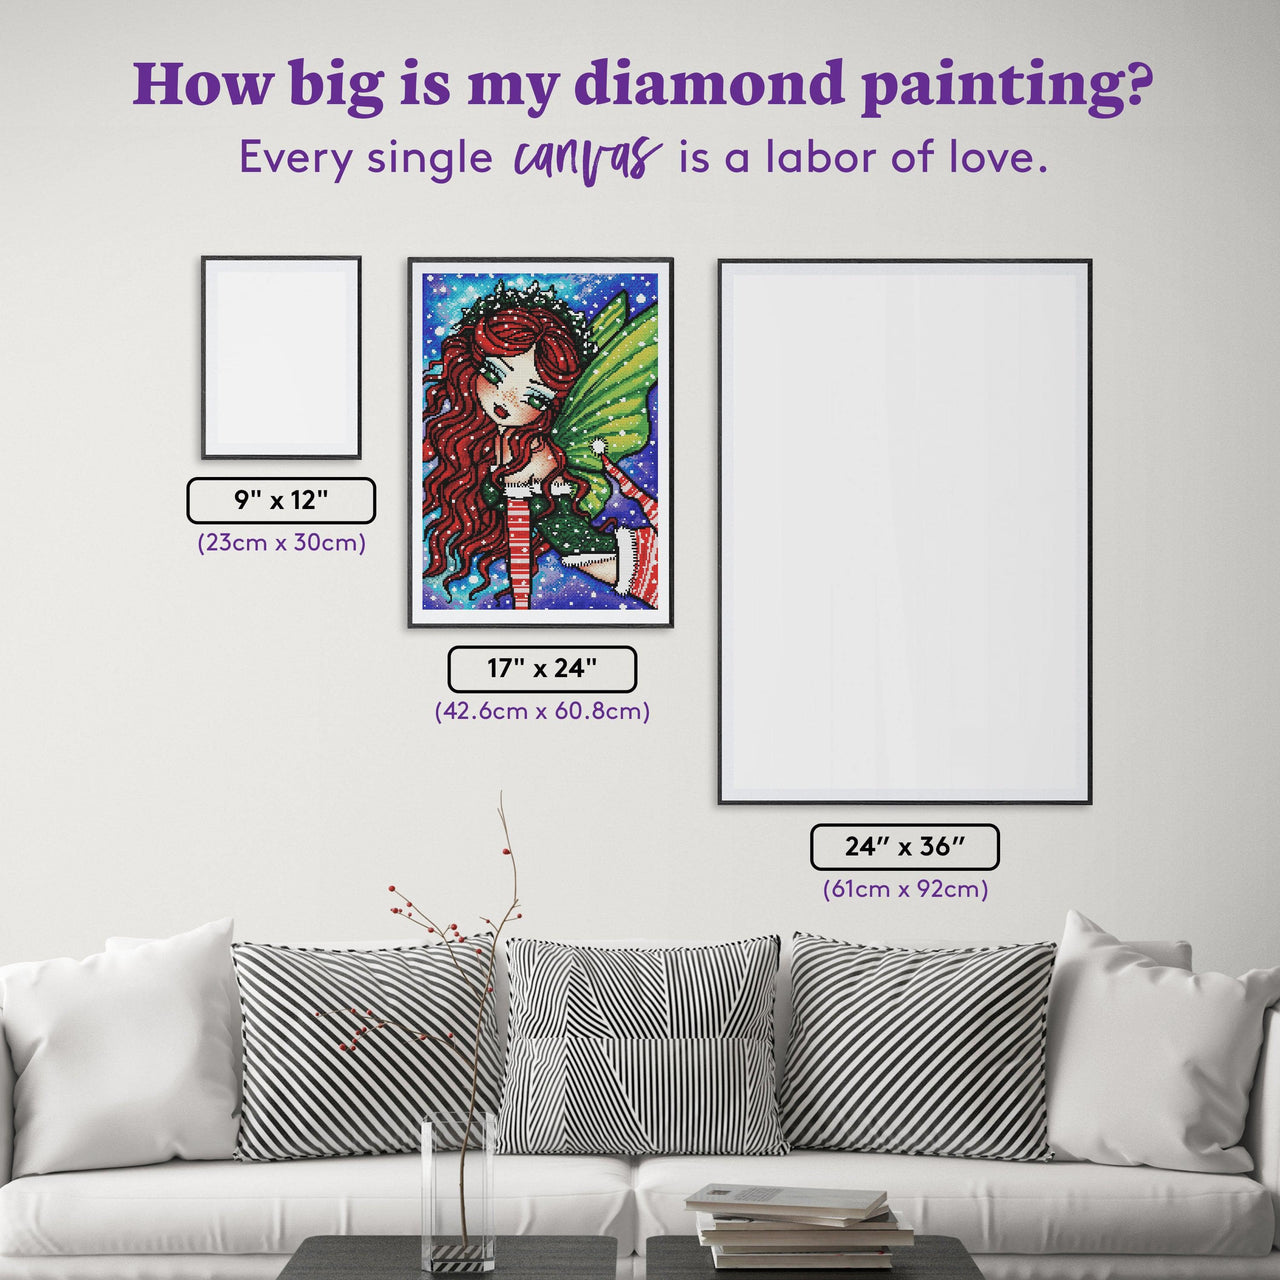 Diamond Painting DAC-4998R-AB 17" x 24" (42.6cm x 60.8cm) / Round with 31 Colors including 3 ABs / 32,984